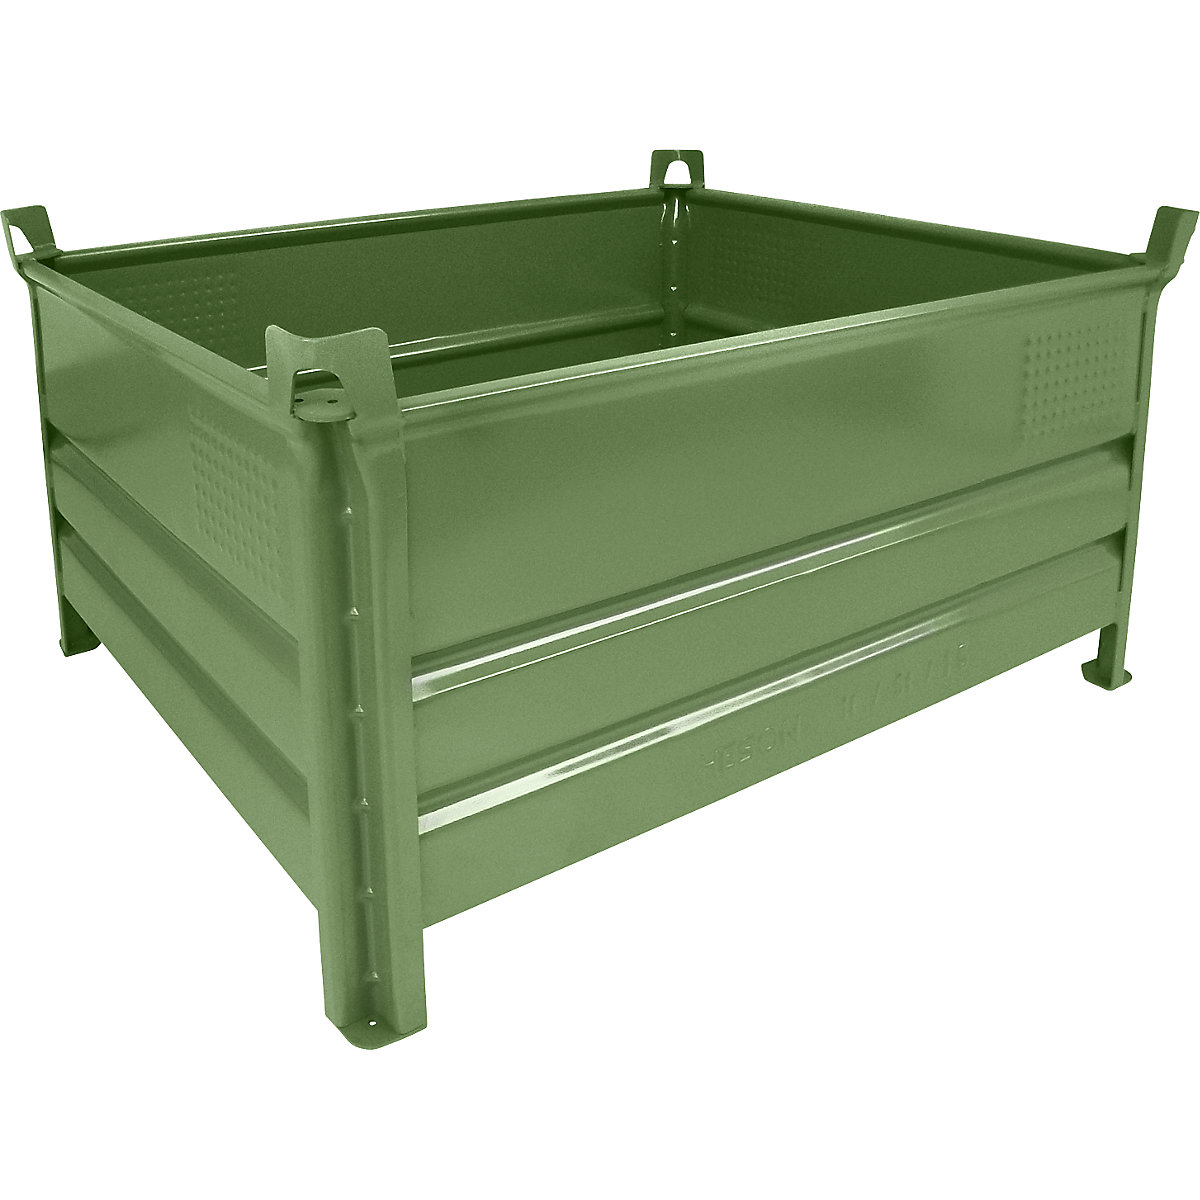 Solid panel box pallet – Heson, WxL 1000 x 1200 mm, max. load 1000 kg, green, 5+ items-8